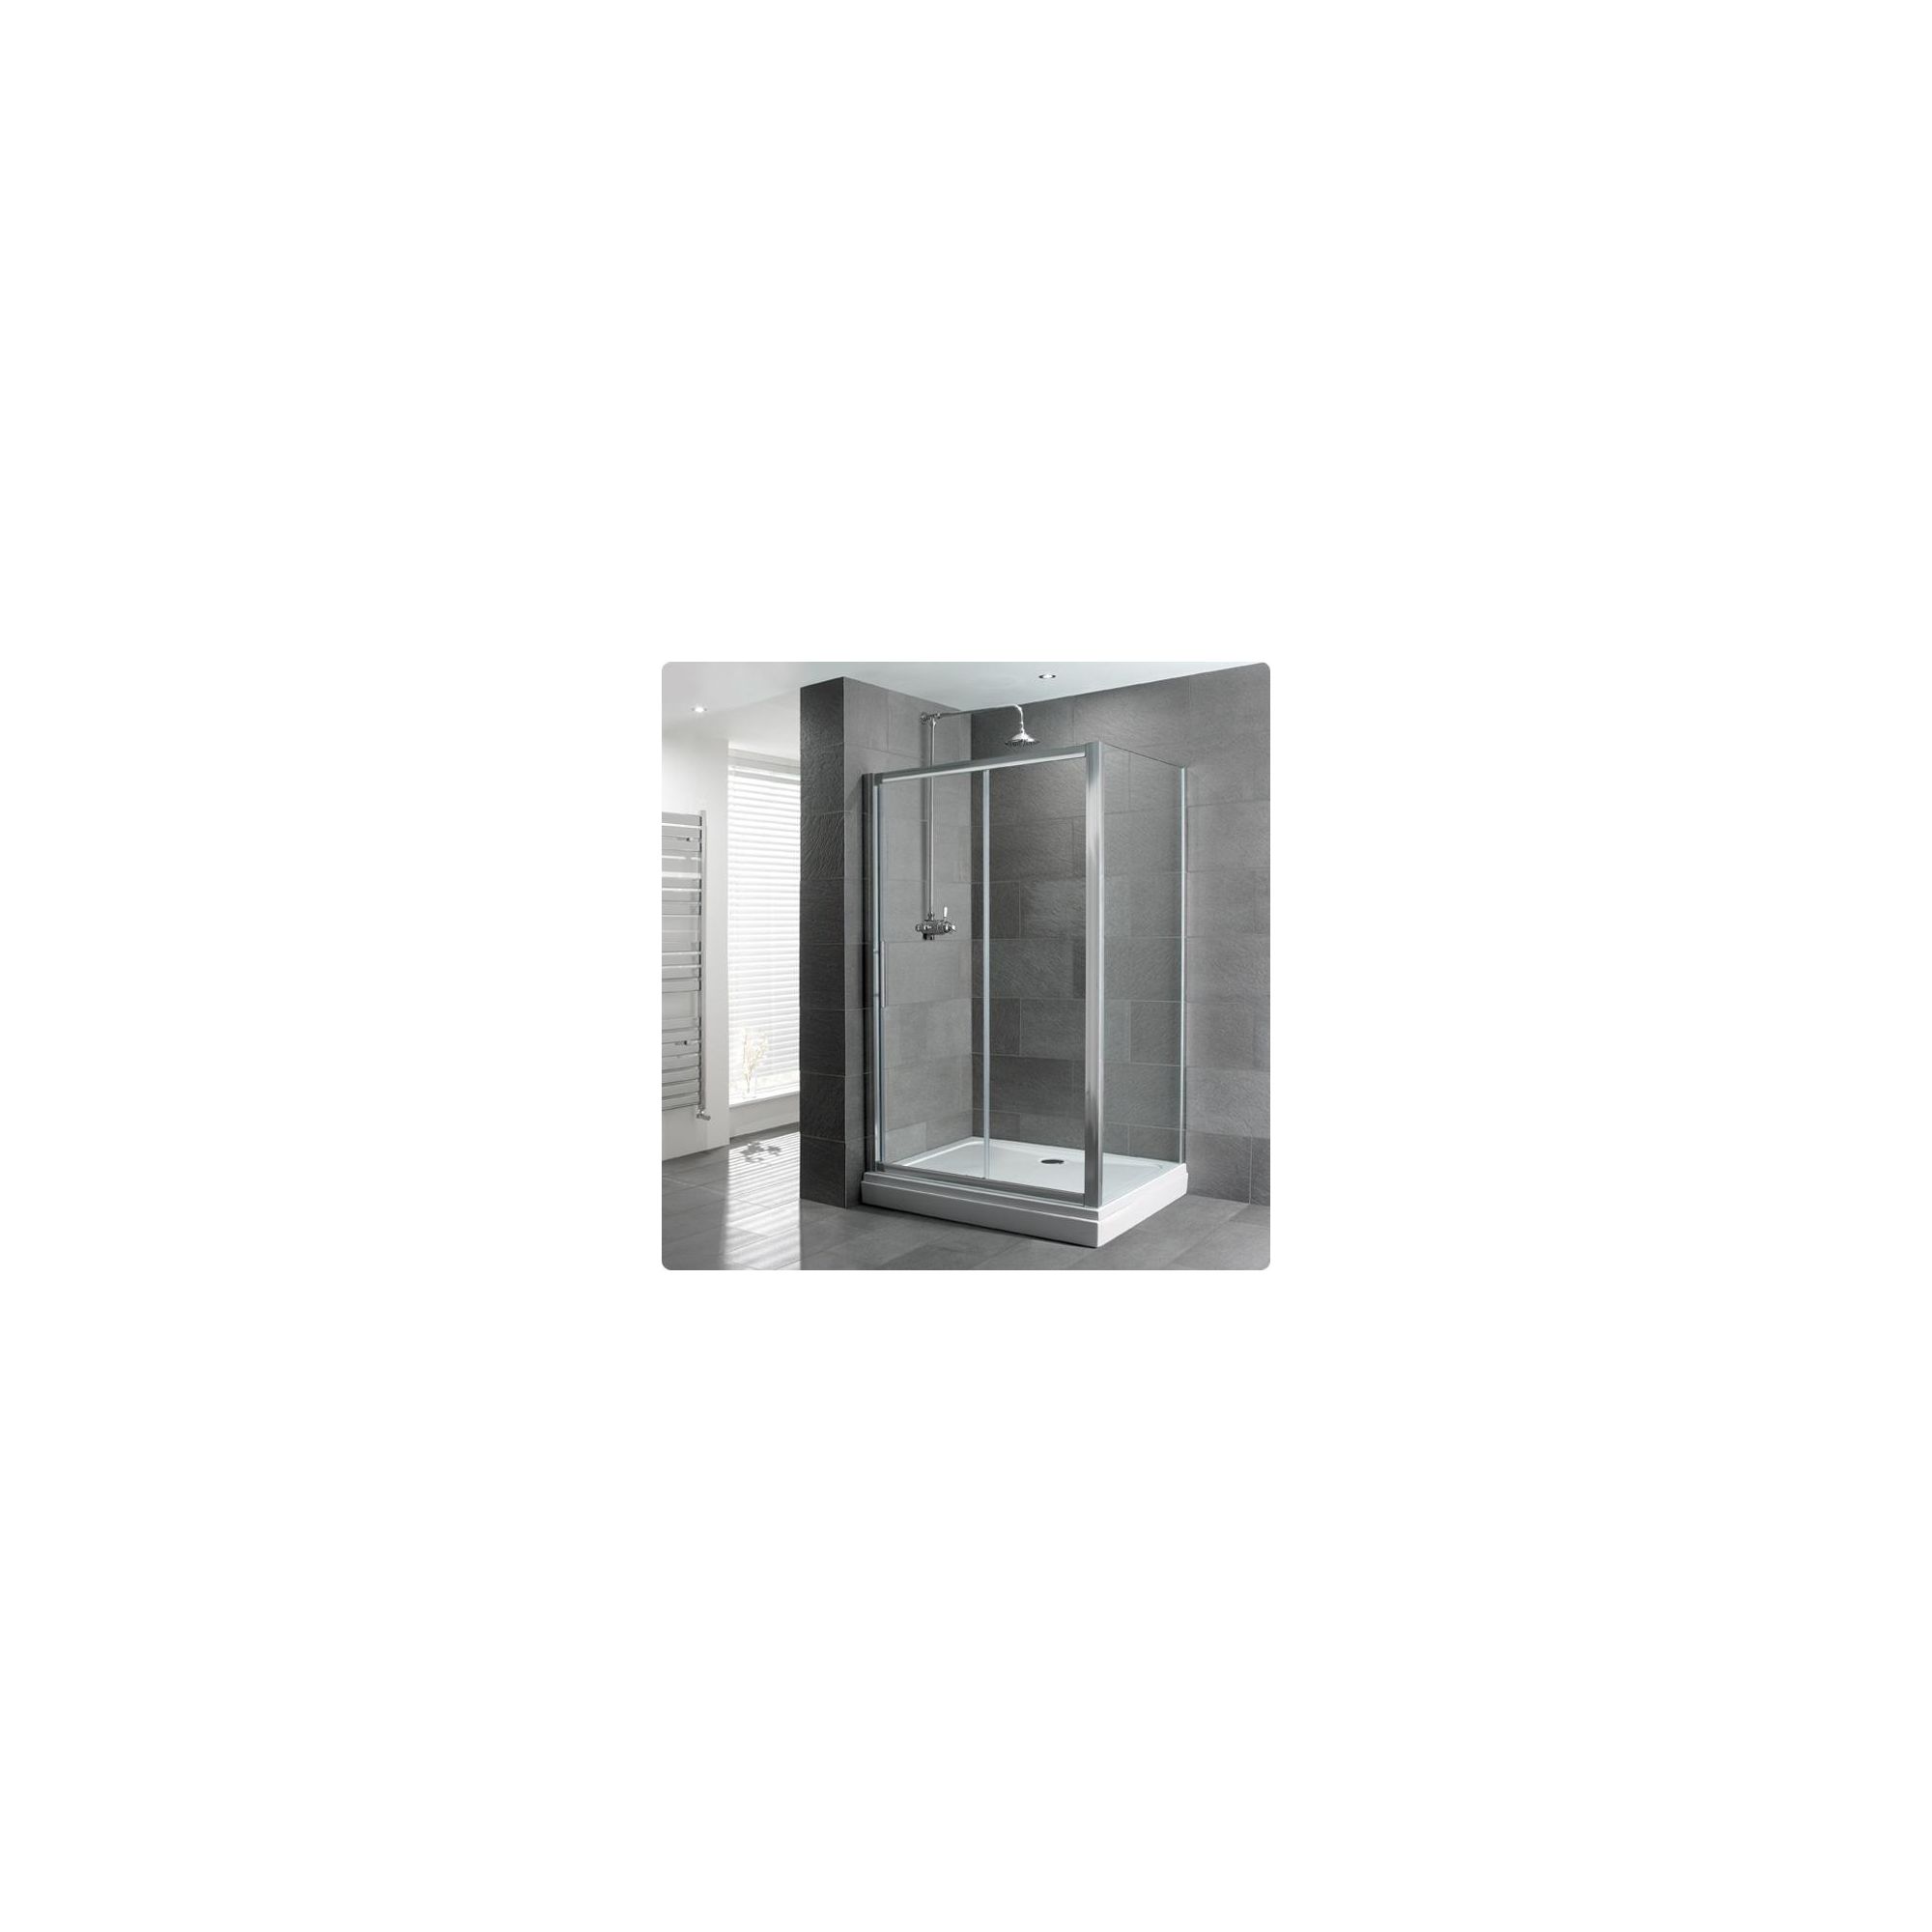 Duchy Select Silver Single Sliding Door Shower Enclosure, 1200mm x 700mm, Standard Tray, 6mm Glass at Tescos Direct